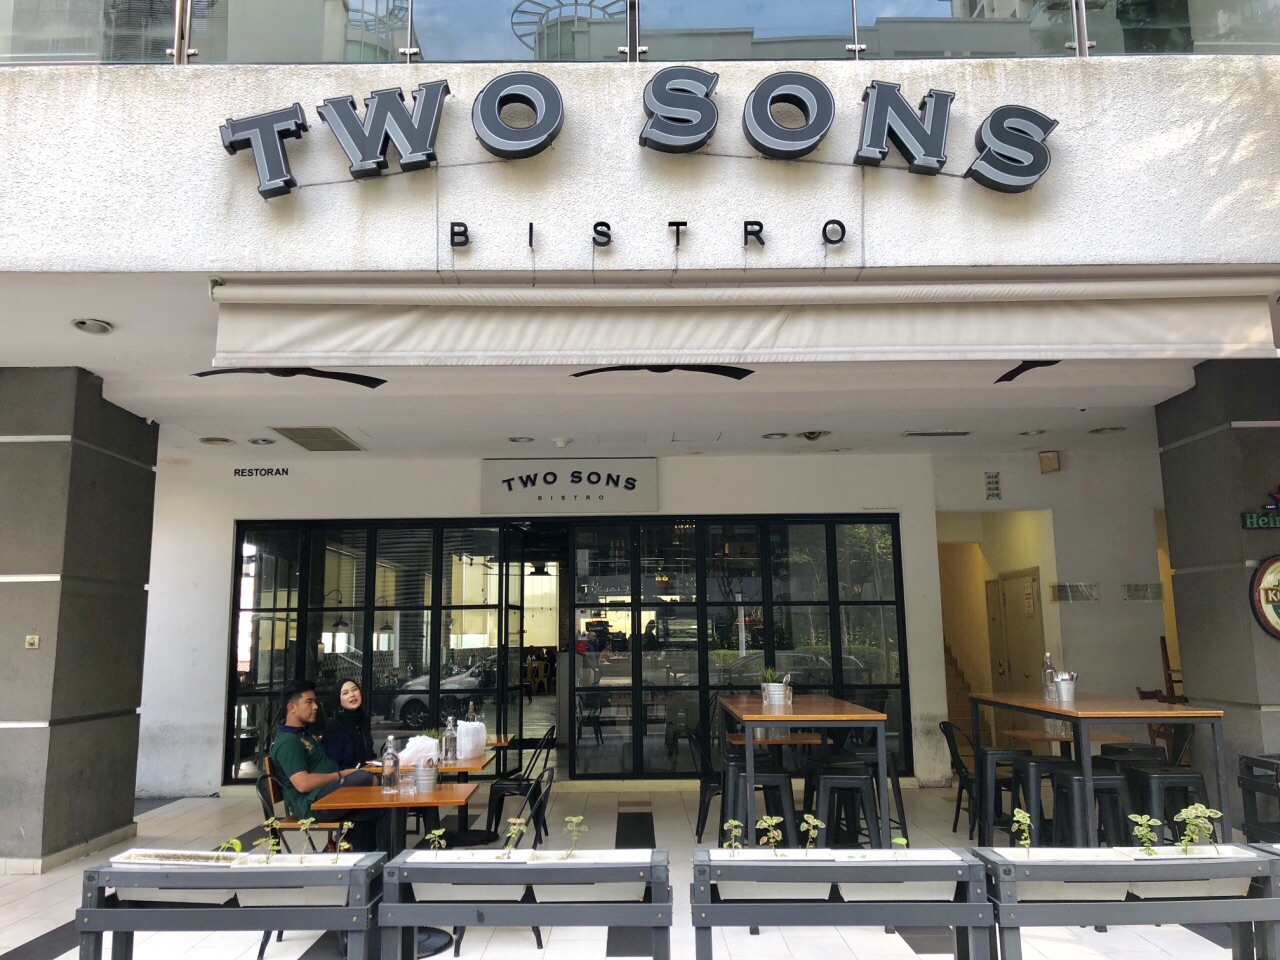 Two sons bistro klcc